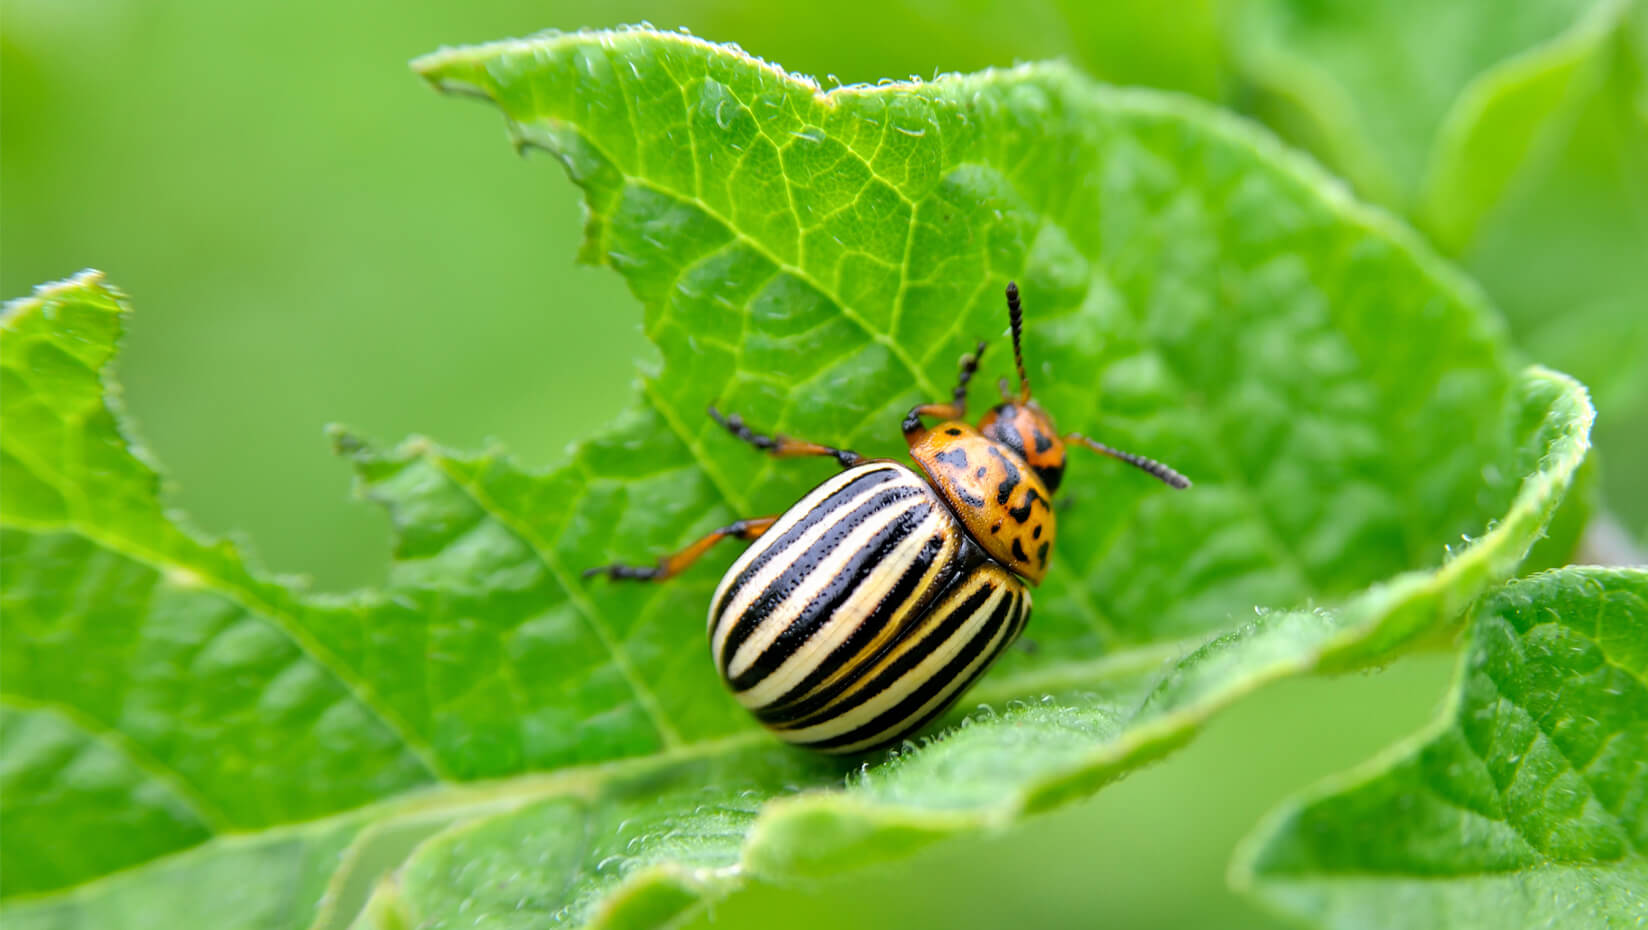 The Ultimate Guide To Organic & Natural Garden Pest Control